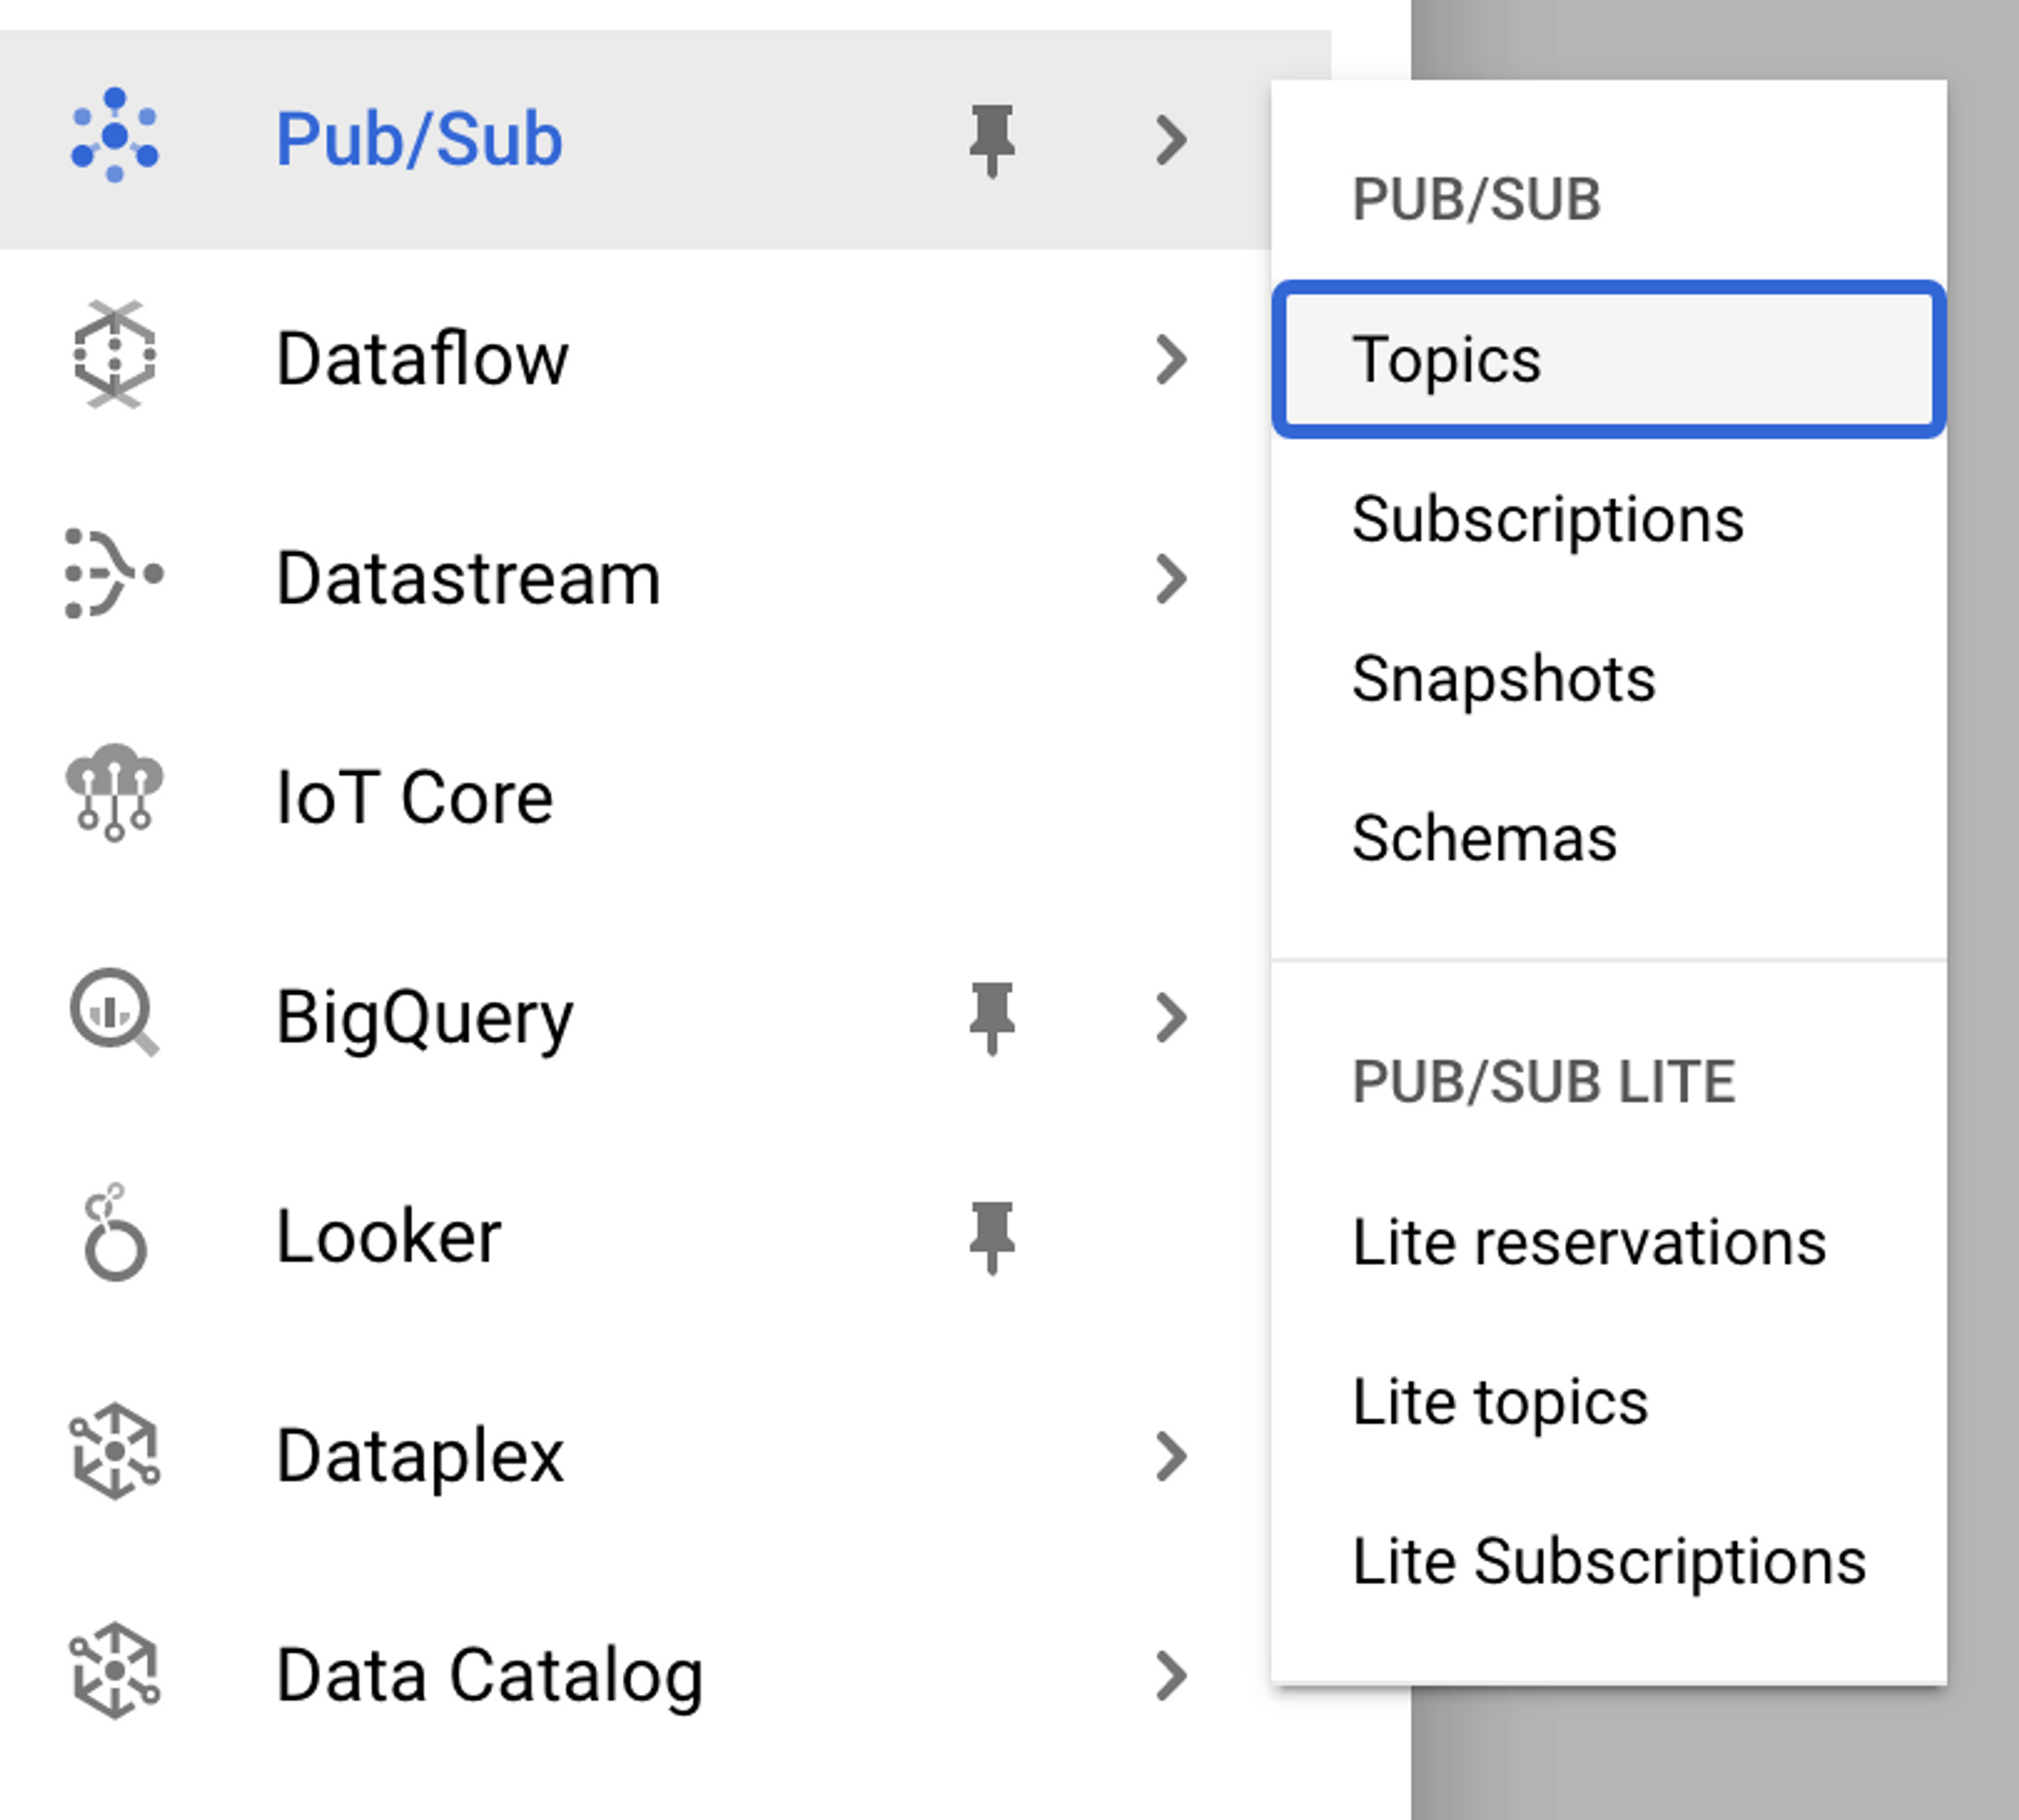 A screenshot showing the location of the "Topics" submenu item within the "Pub/Sub" parent menu